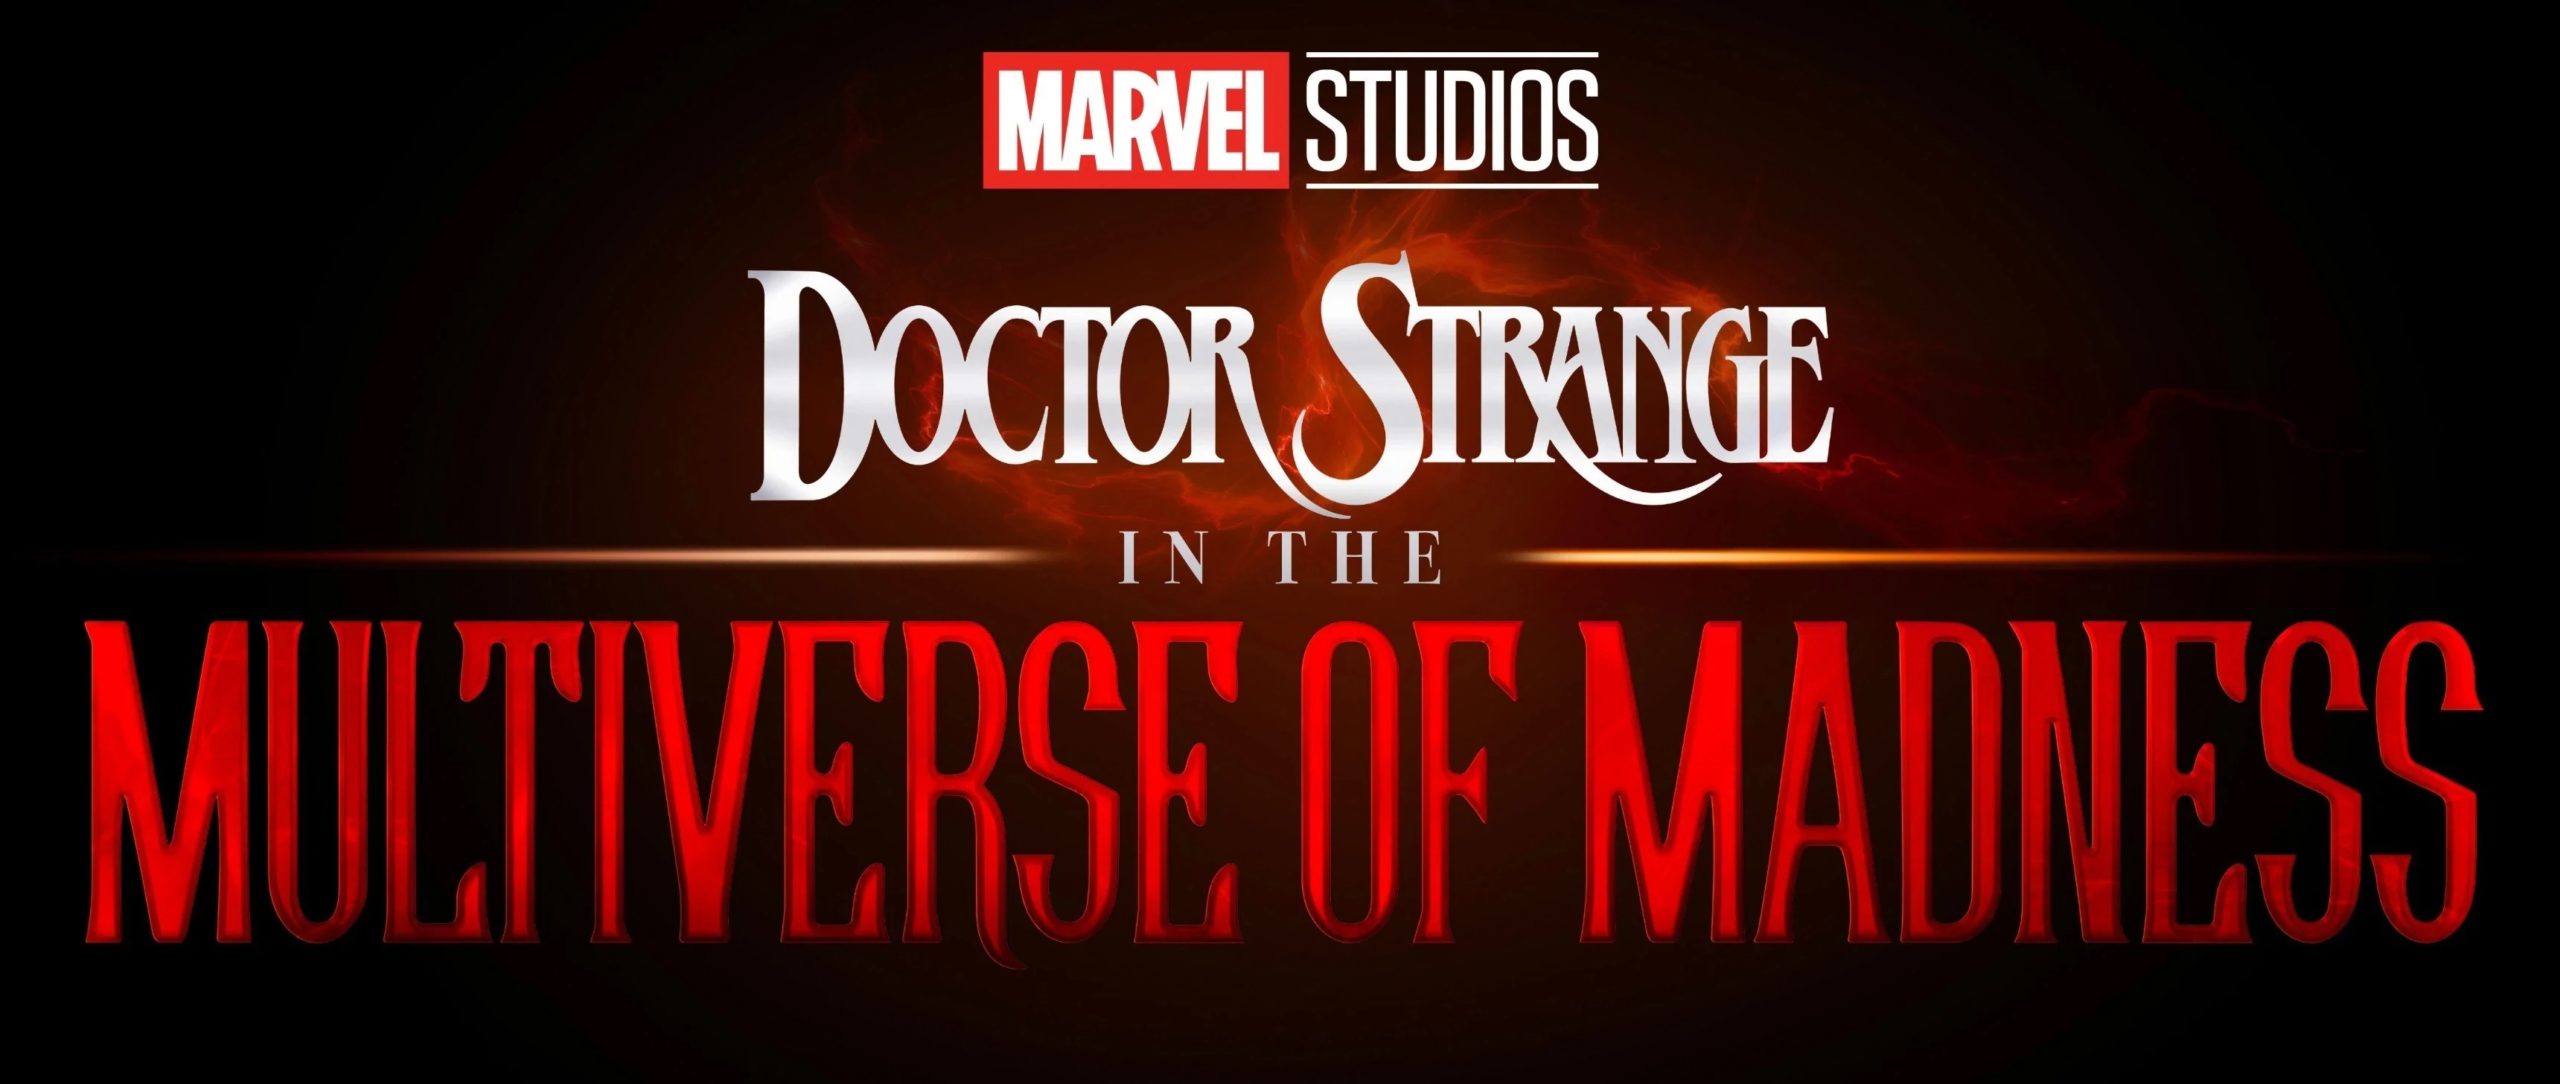 Doctor Strange in the Multiverse of Madness Release Date